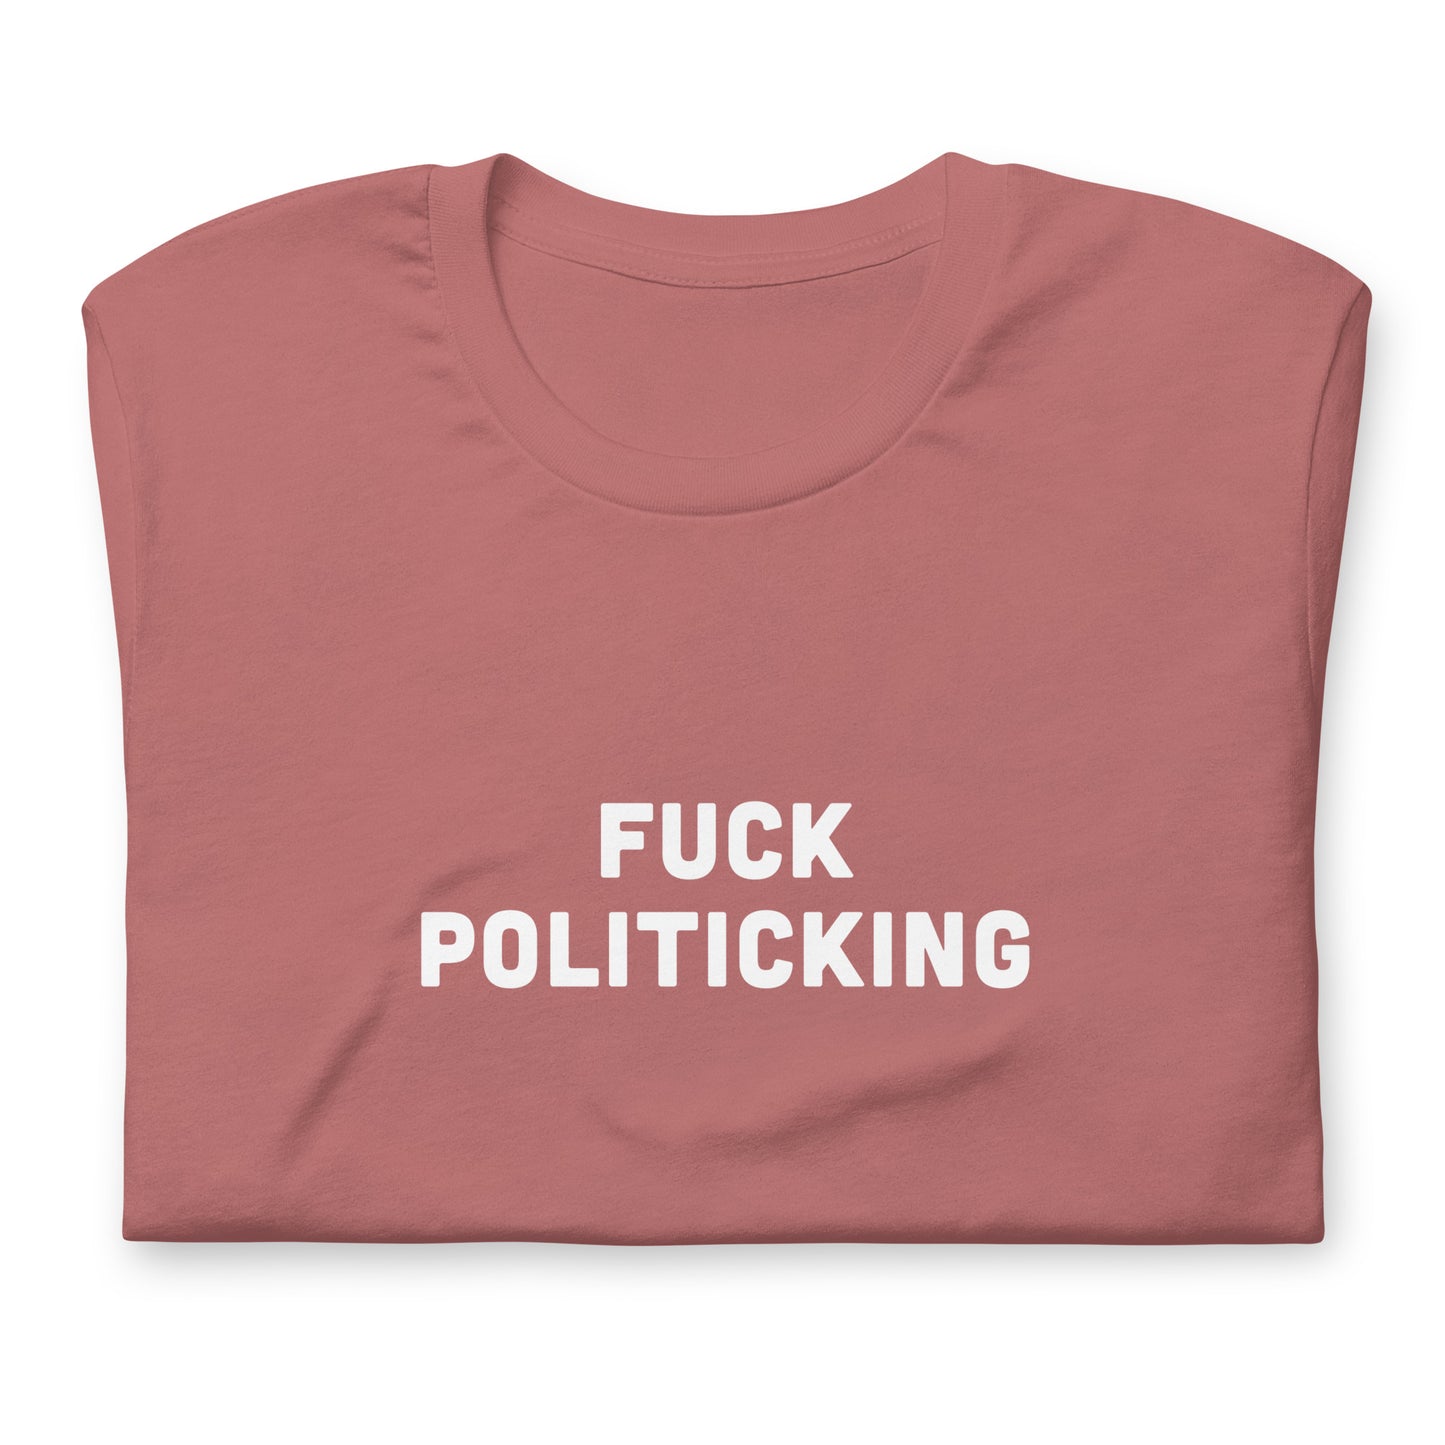 Fuck Politicking T-Shirt Size XL Color Navy